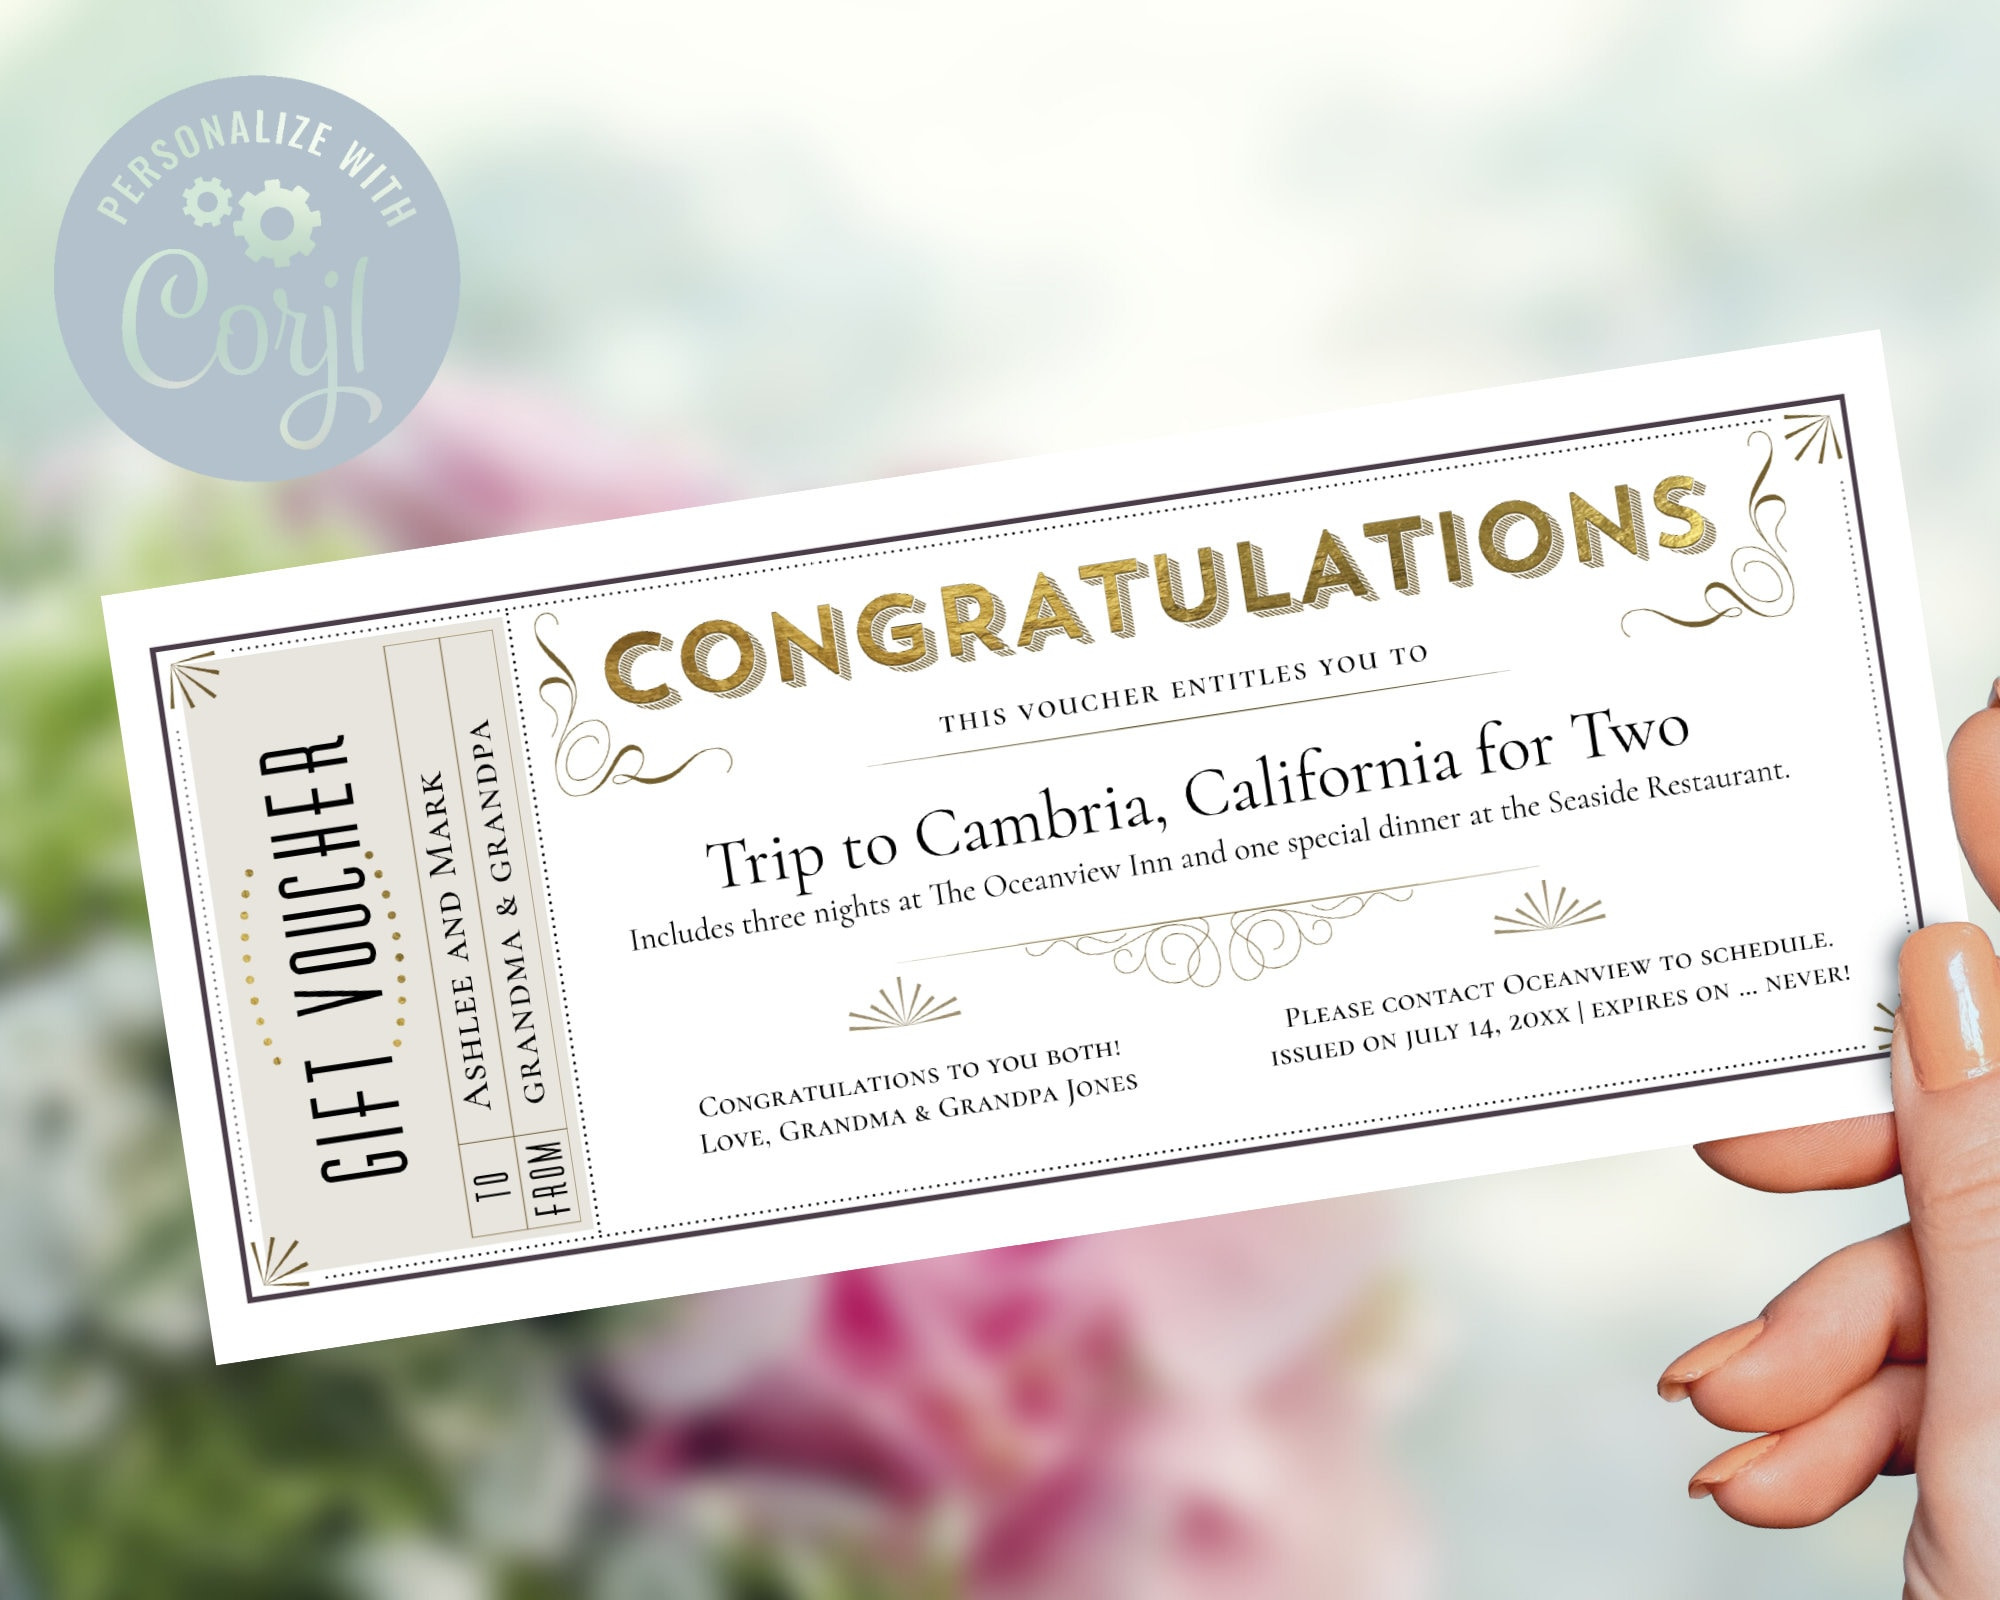 Congratulations Gift Certificate Template / Editable Gift - Etsy For This Entitles The Bearer To Template Certificate